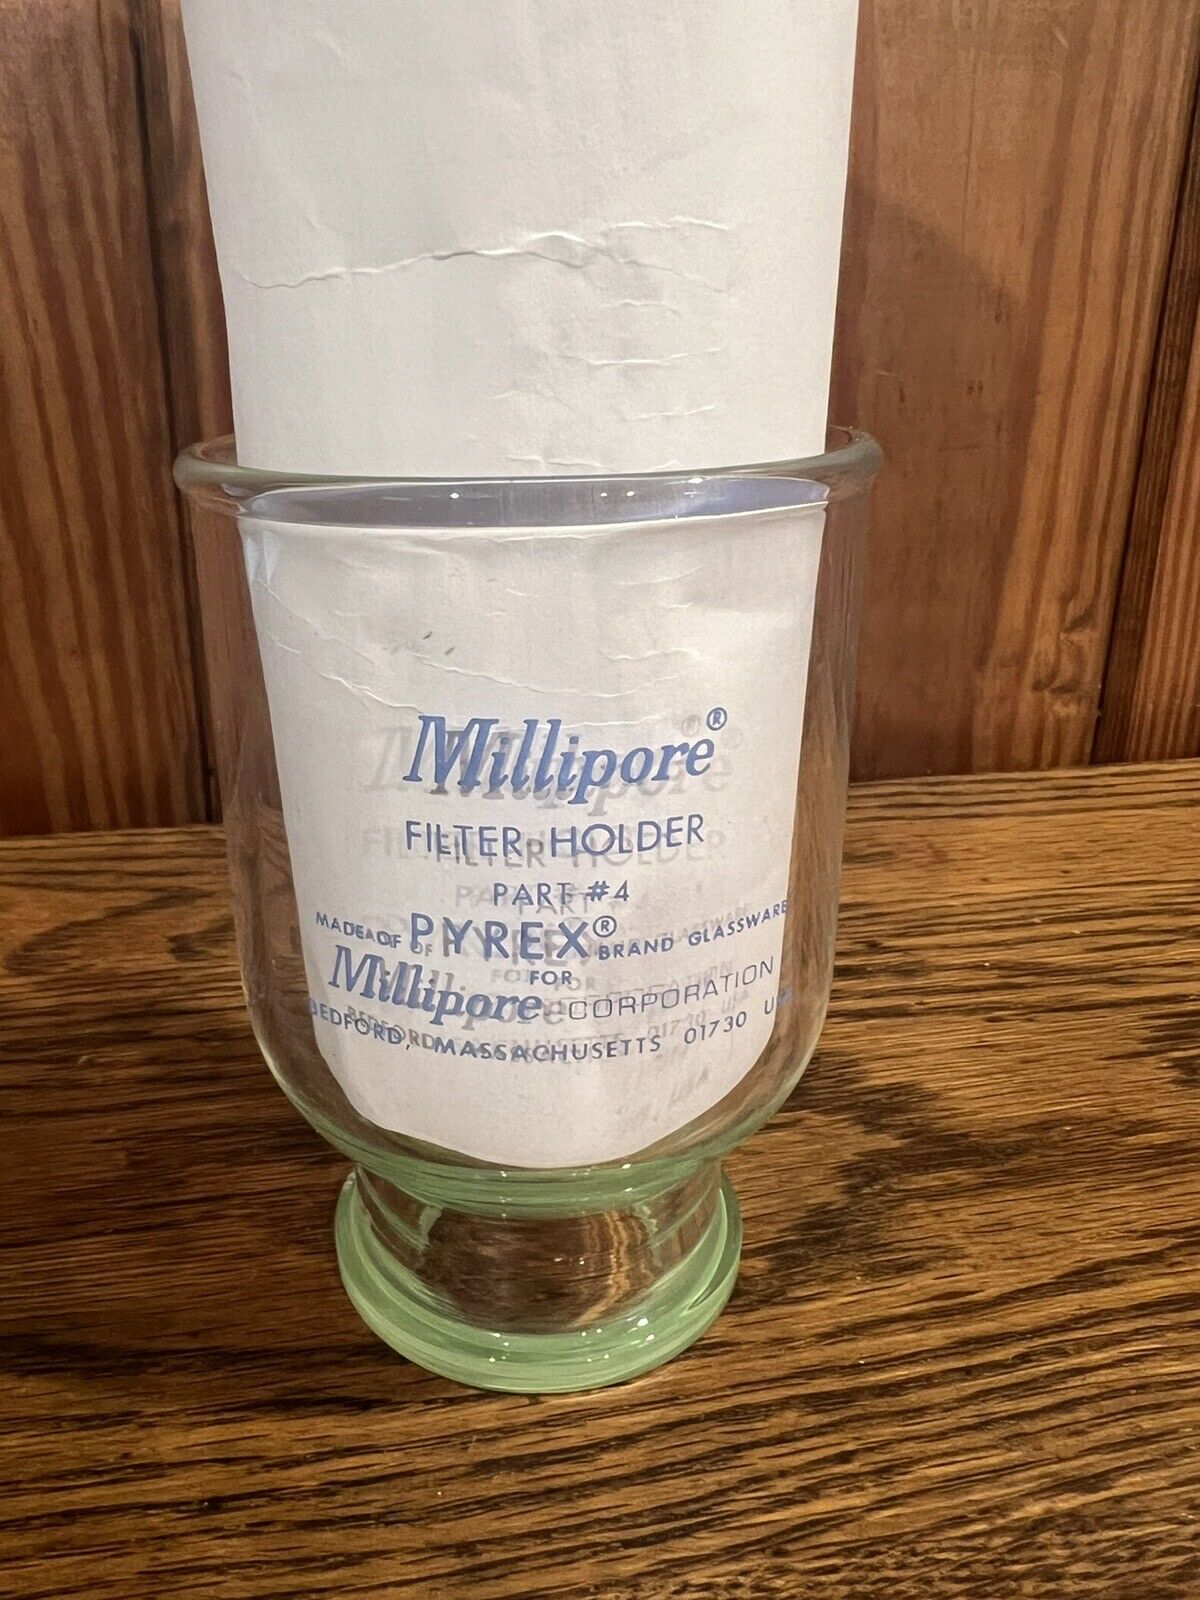 Collectible Vintage Millipore Filter Holder made by Pyrex